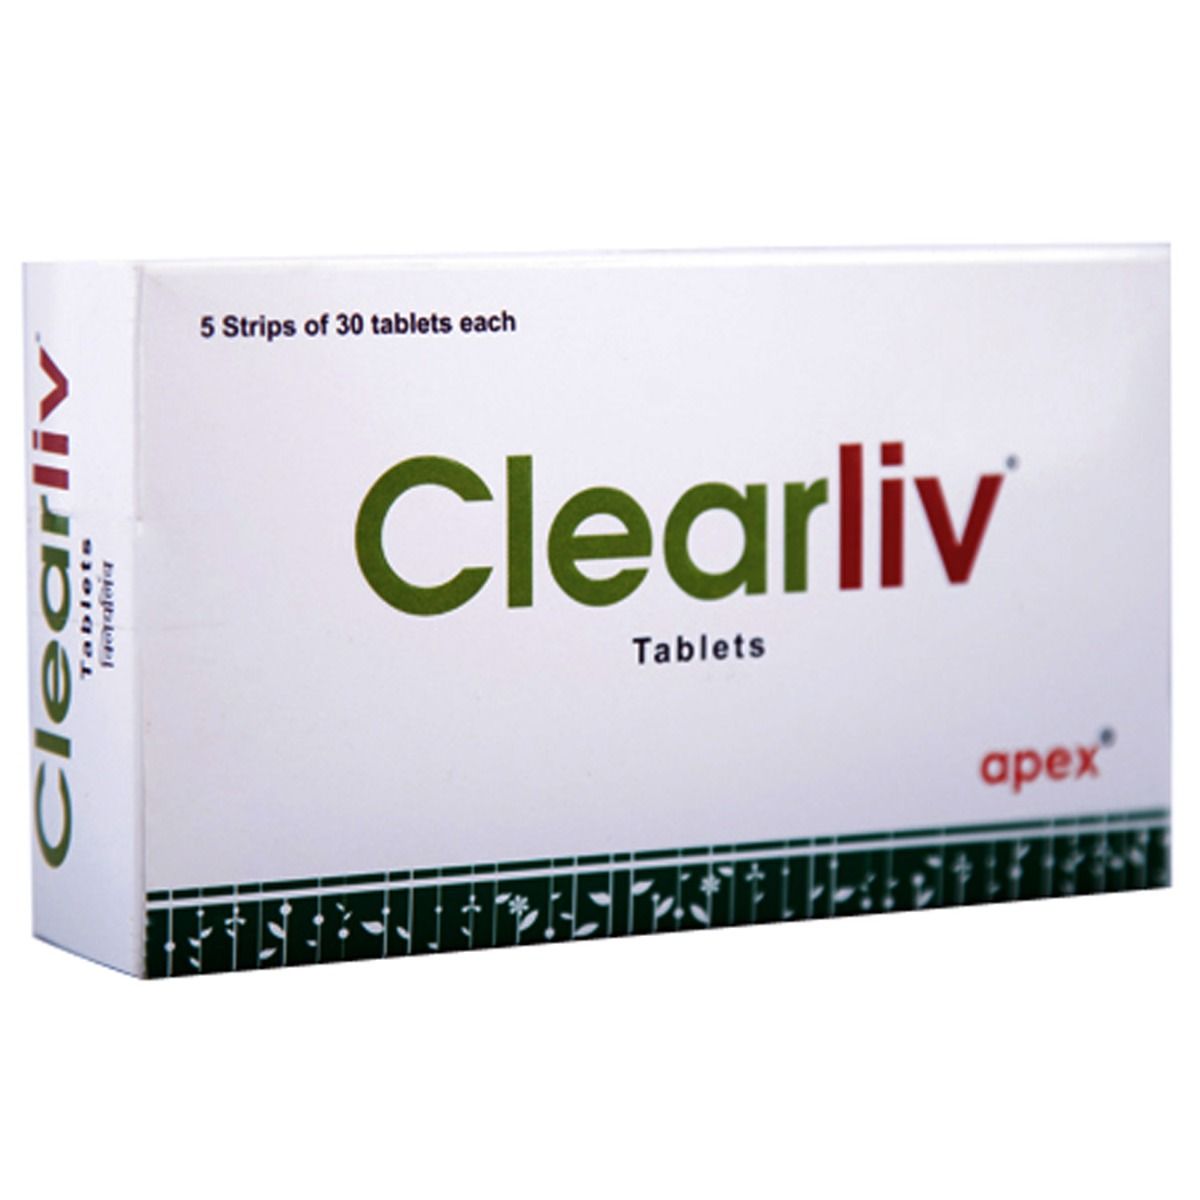 Clearliv, 30 Tablets, Pack of 1 